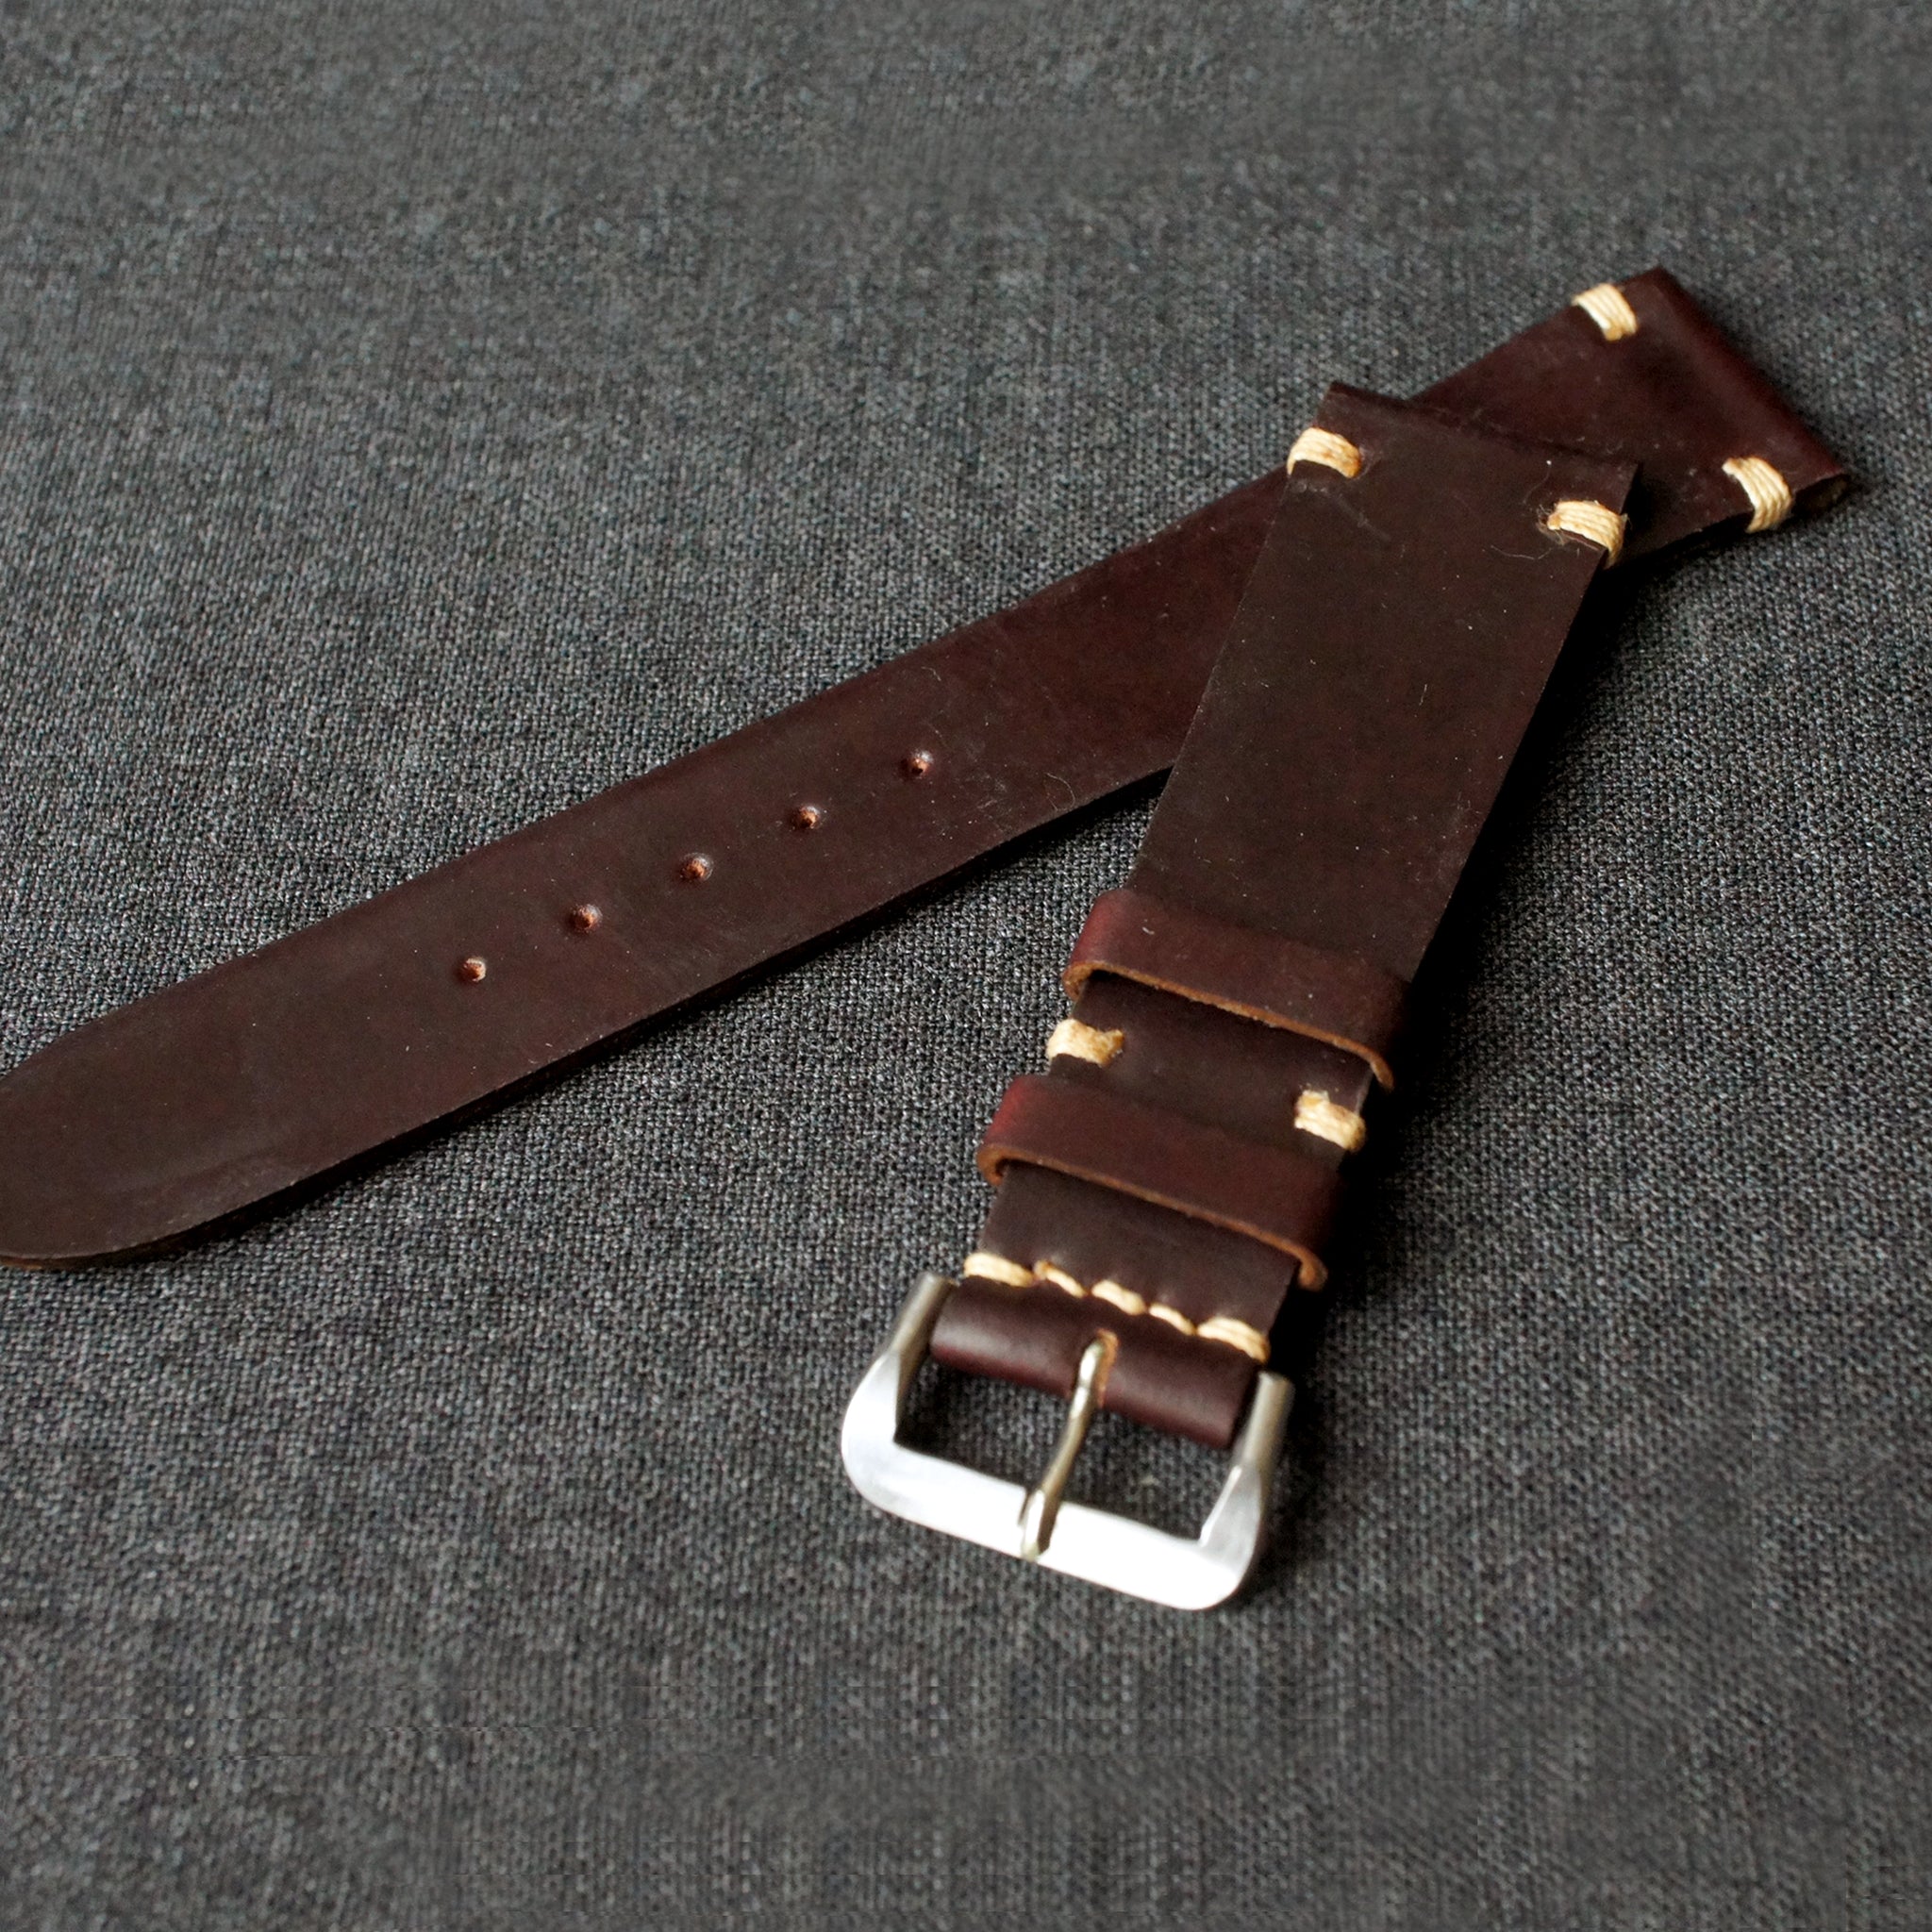 Color 8 Horween Shell Cordovan Leather Watch Strap in All 